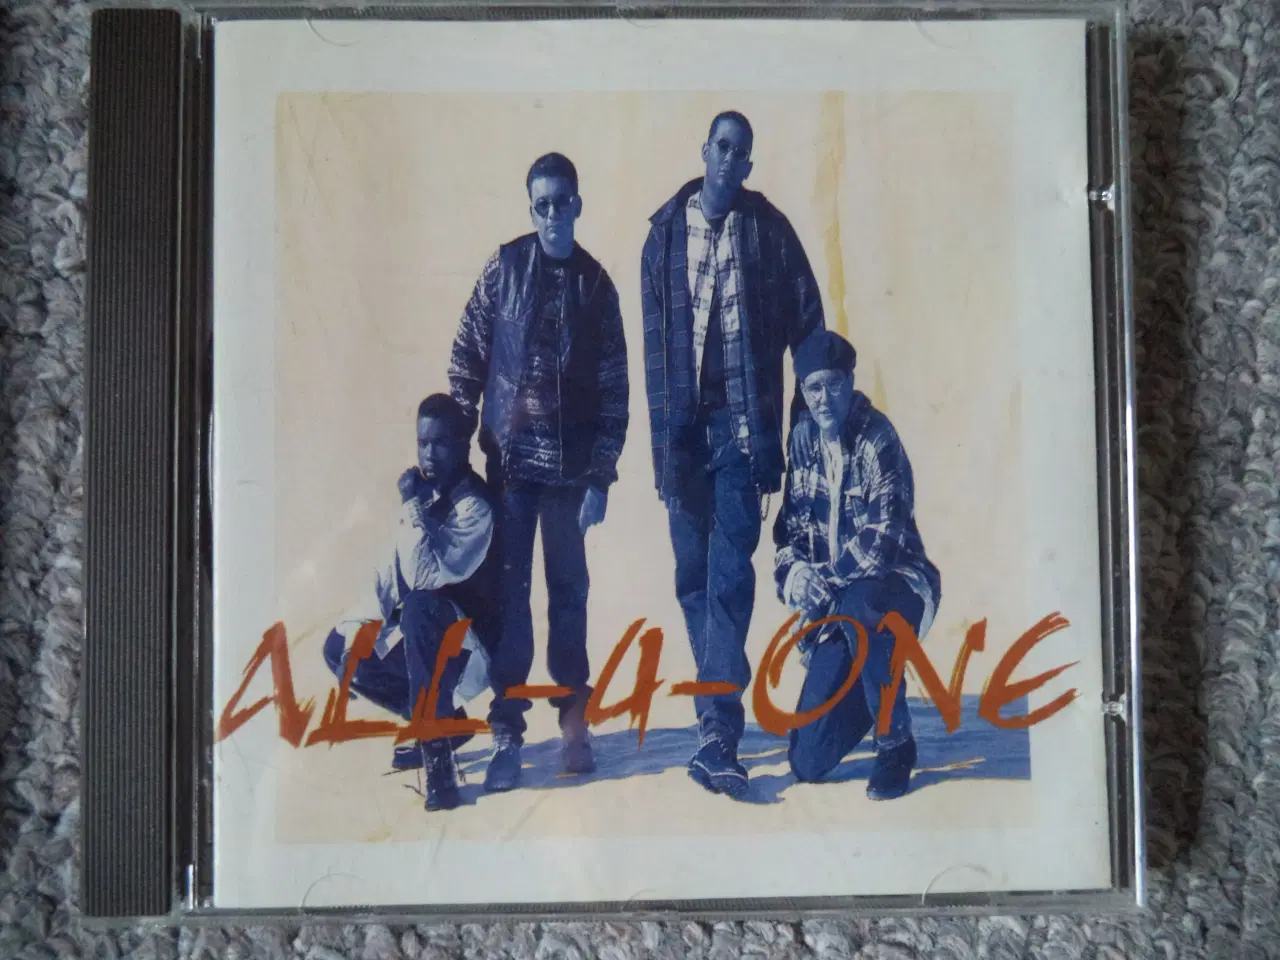 Billede 1 - All-4-One ** All-4-One (7567-82588-2)             